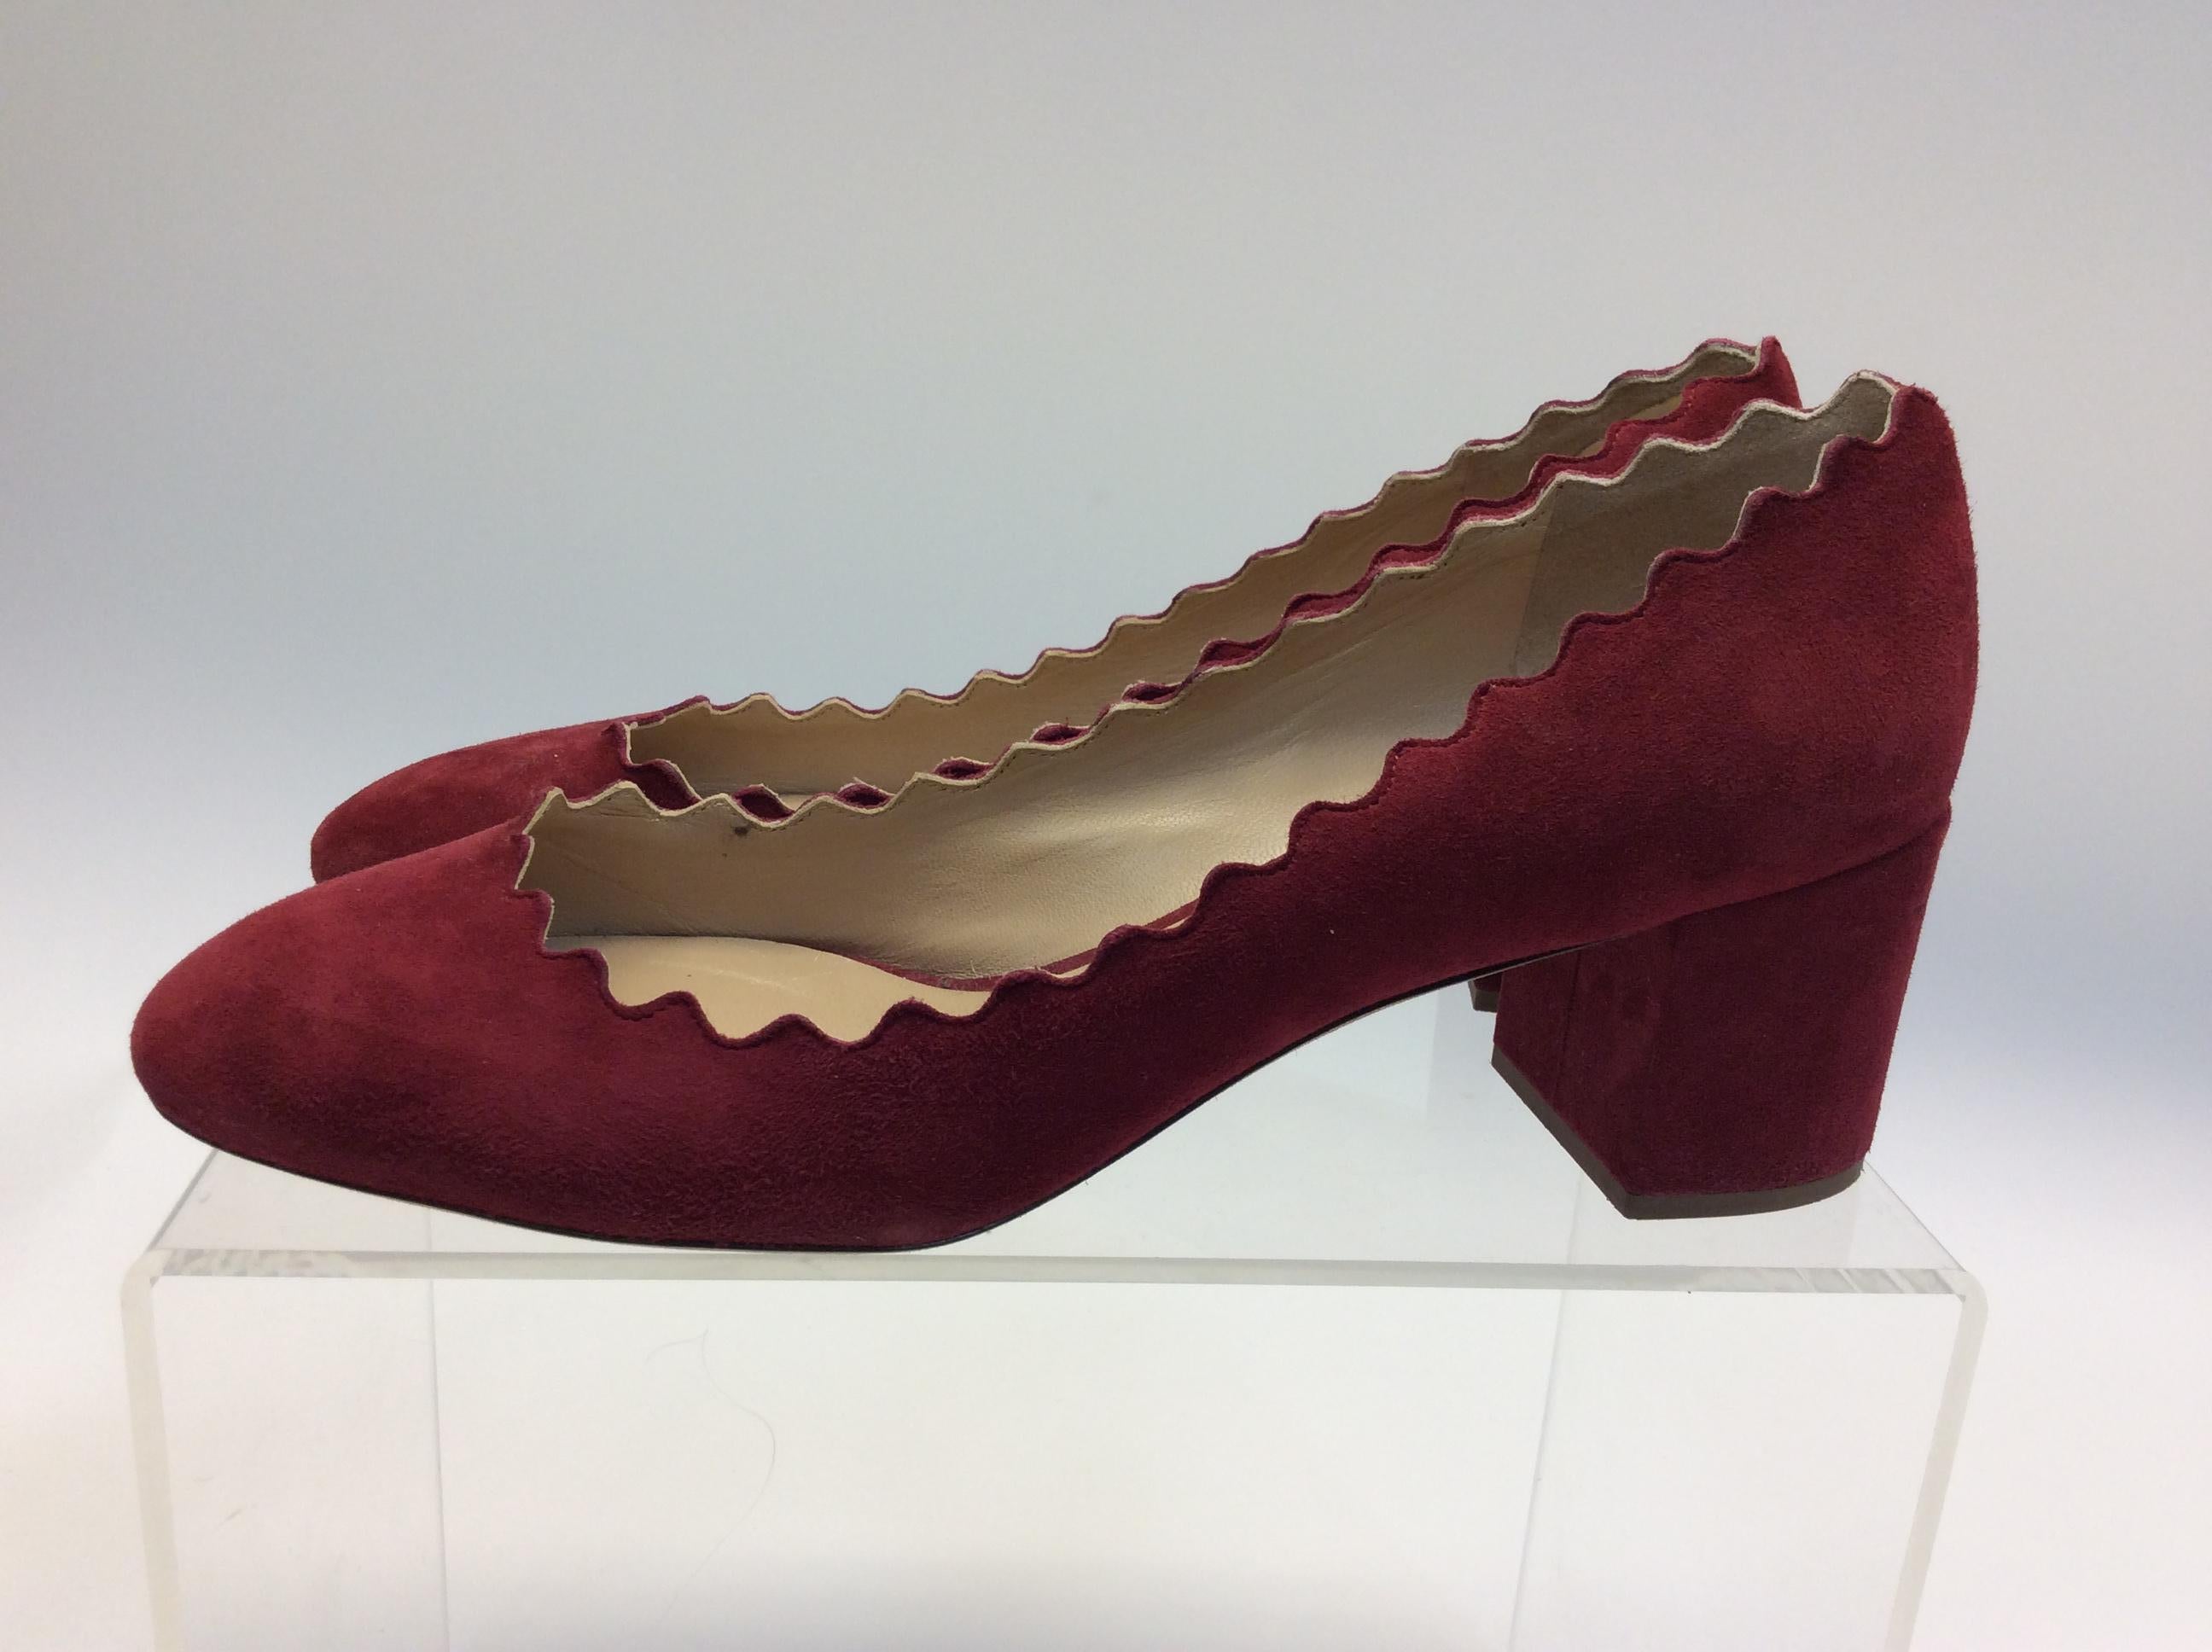 Chloe Burgundy Suede Pump 
$199
Made in Italy
Suede
Size 39.5
2